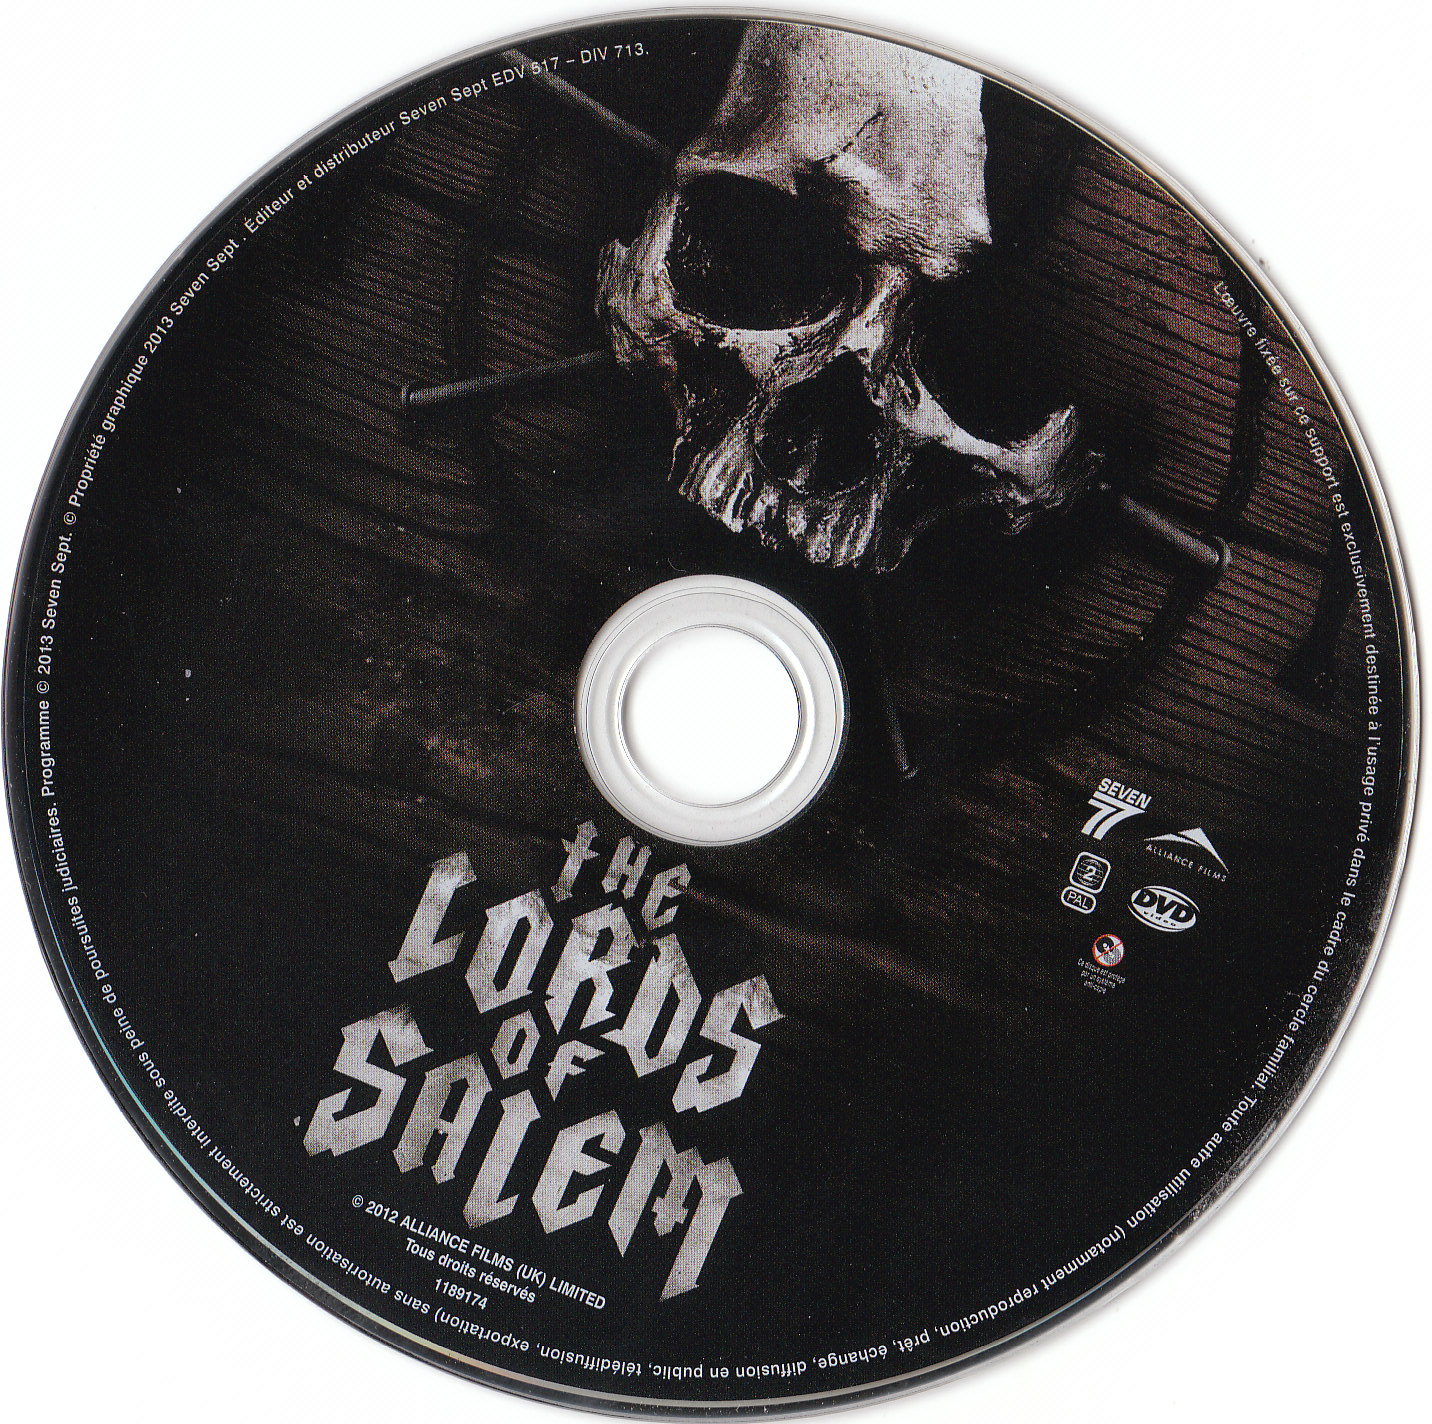 The lords of salem